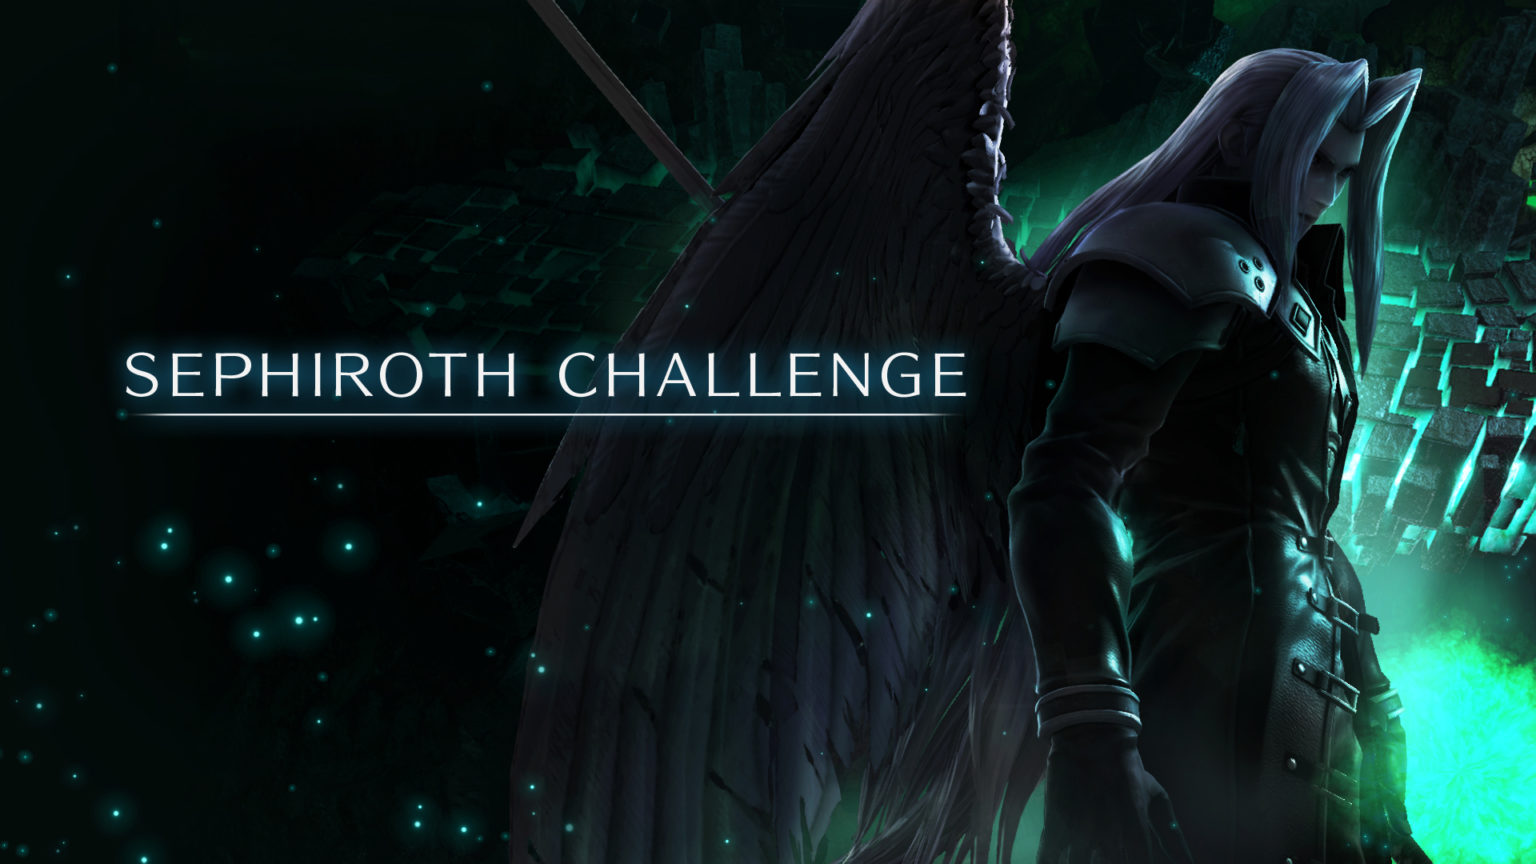 How to complete the Sephiroth Challenge and unlock Sephiroth early in